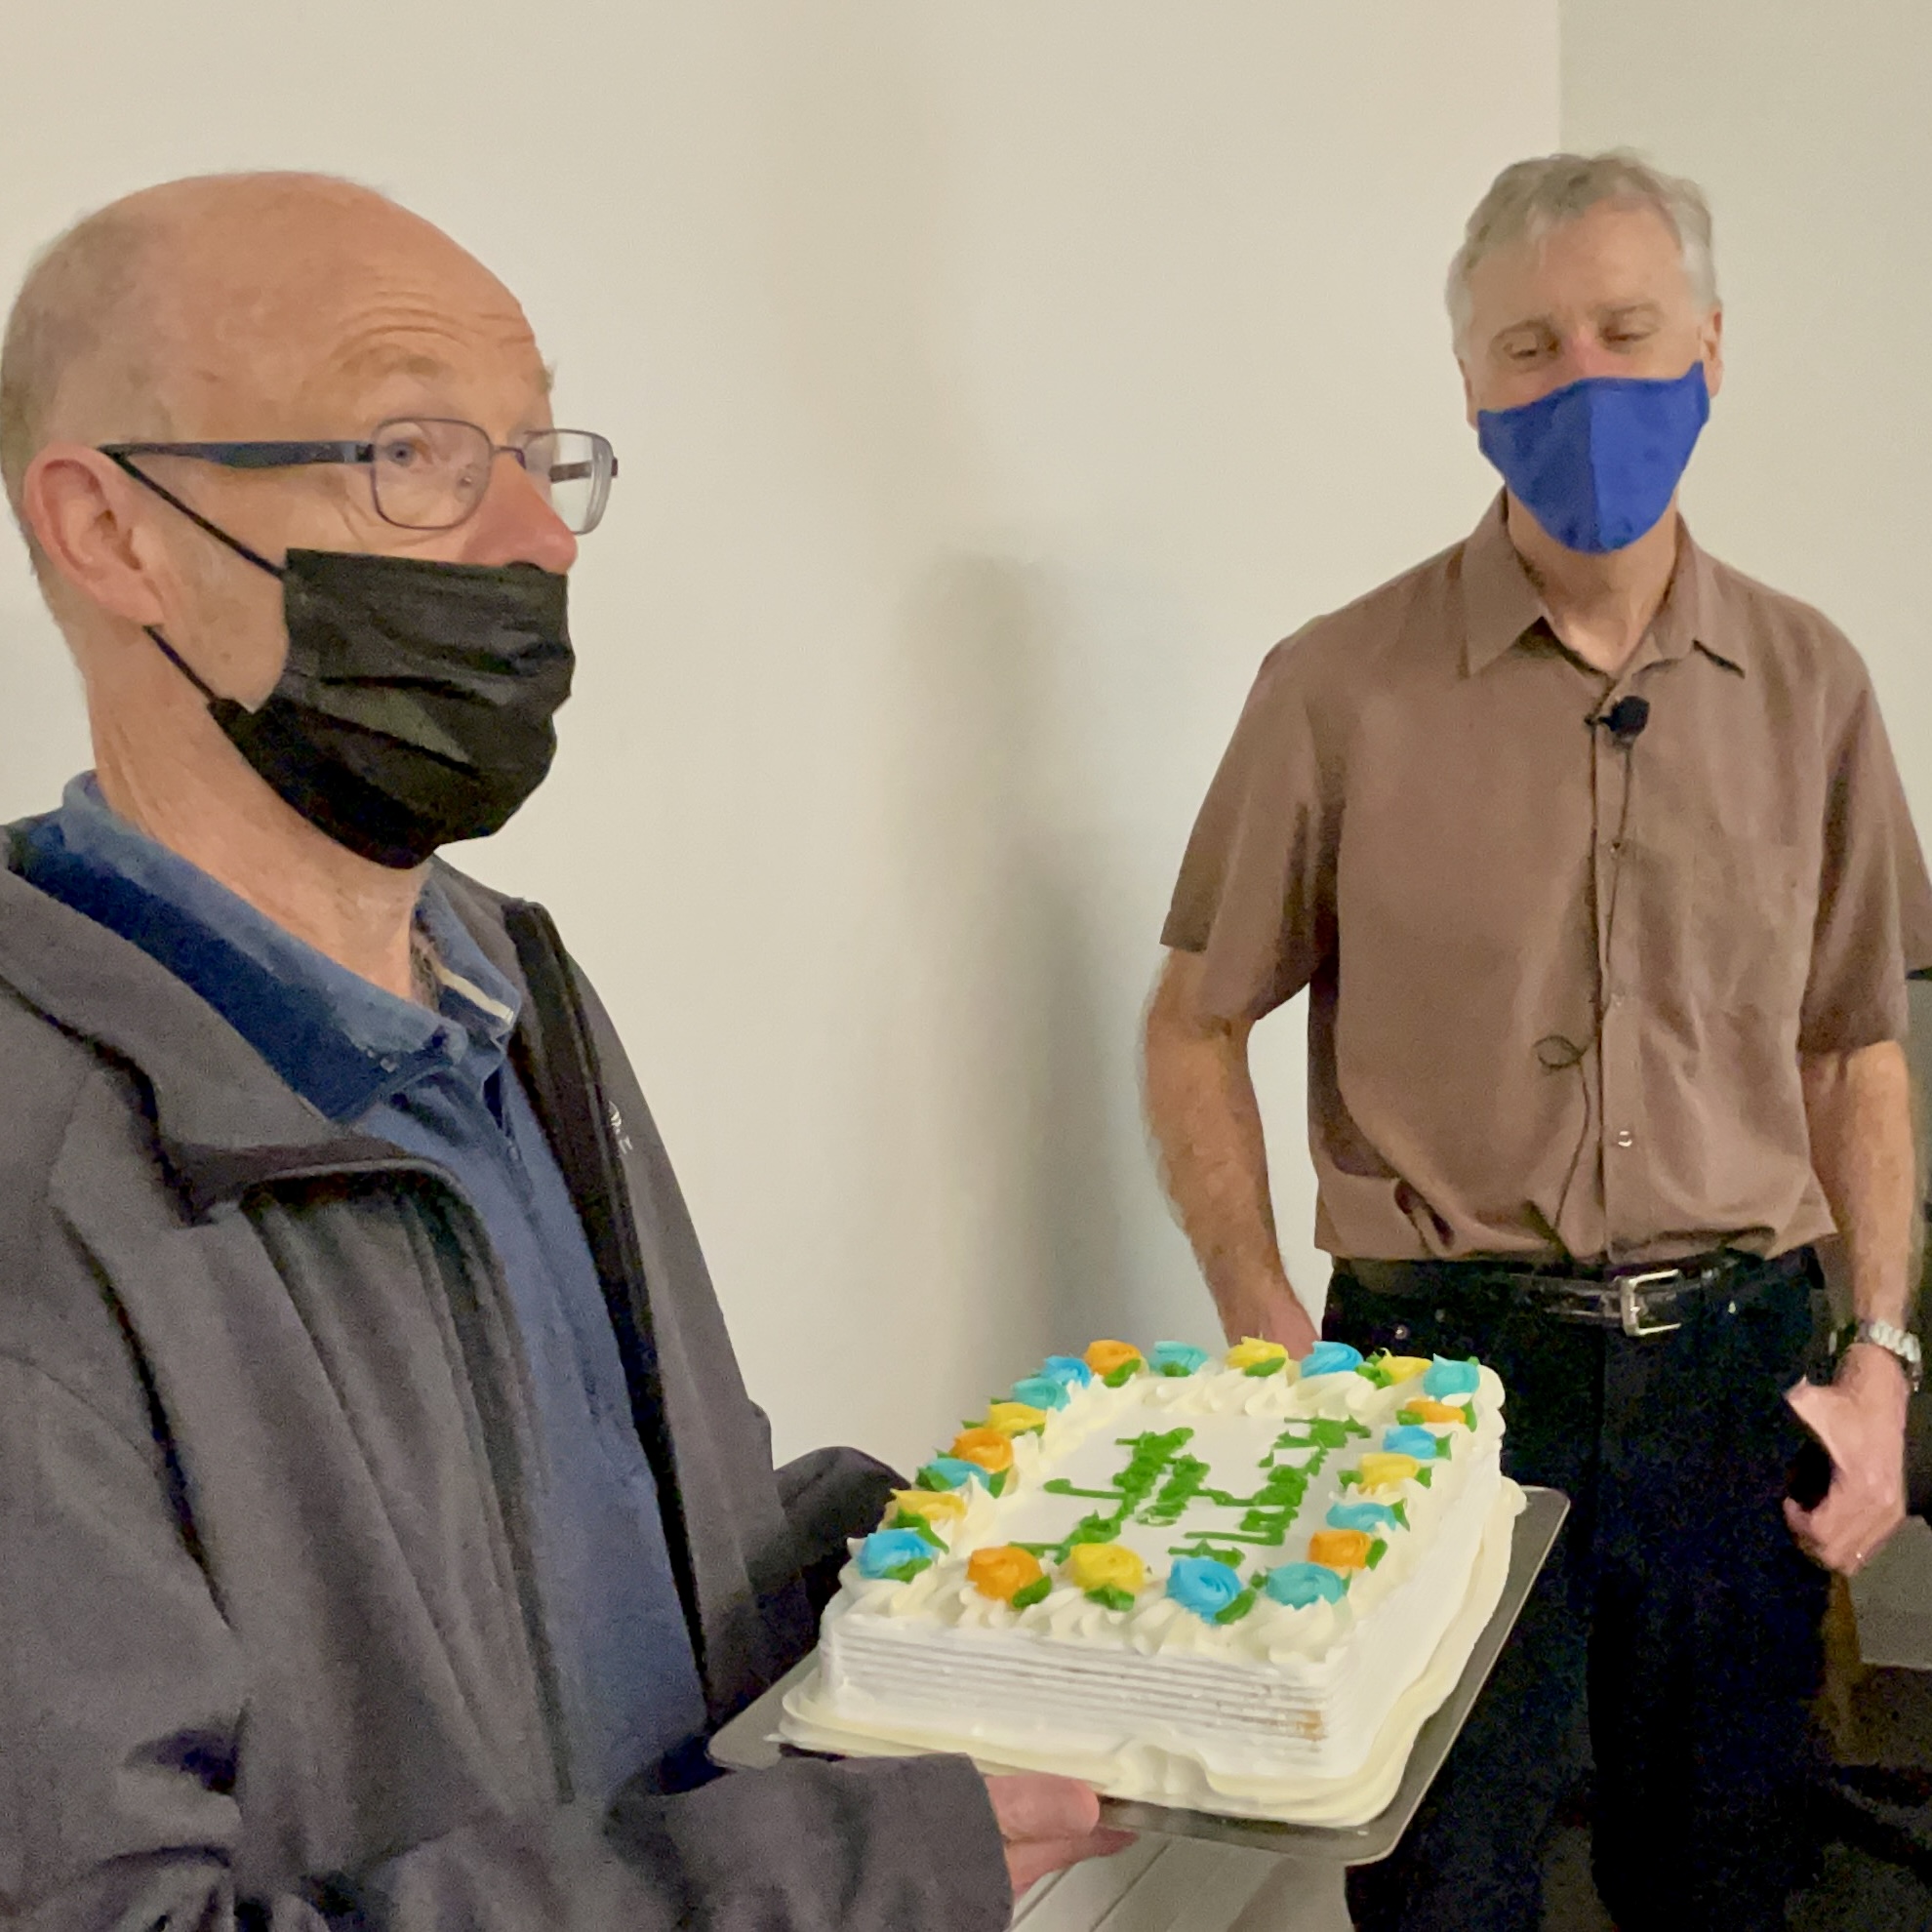 two white men in a classroom with a cake